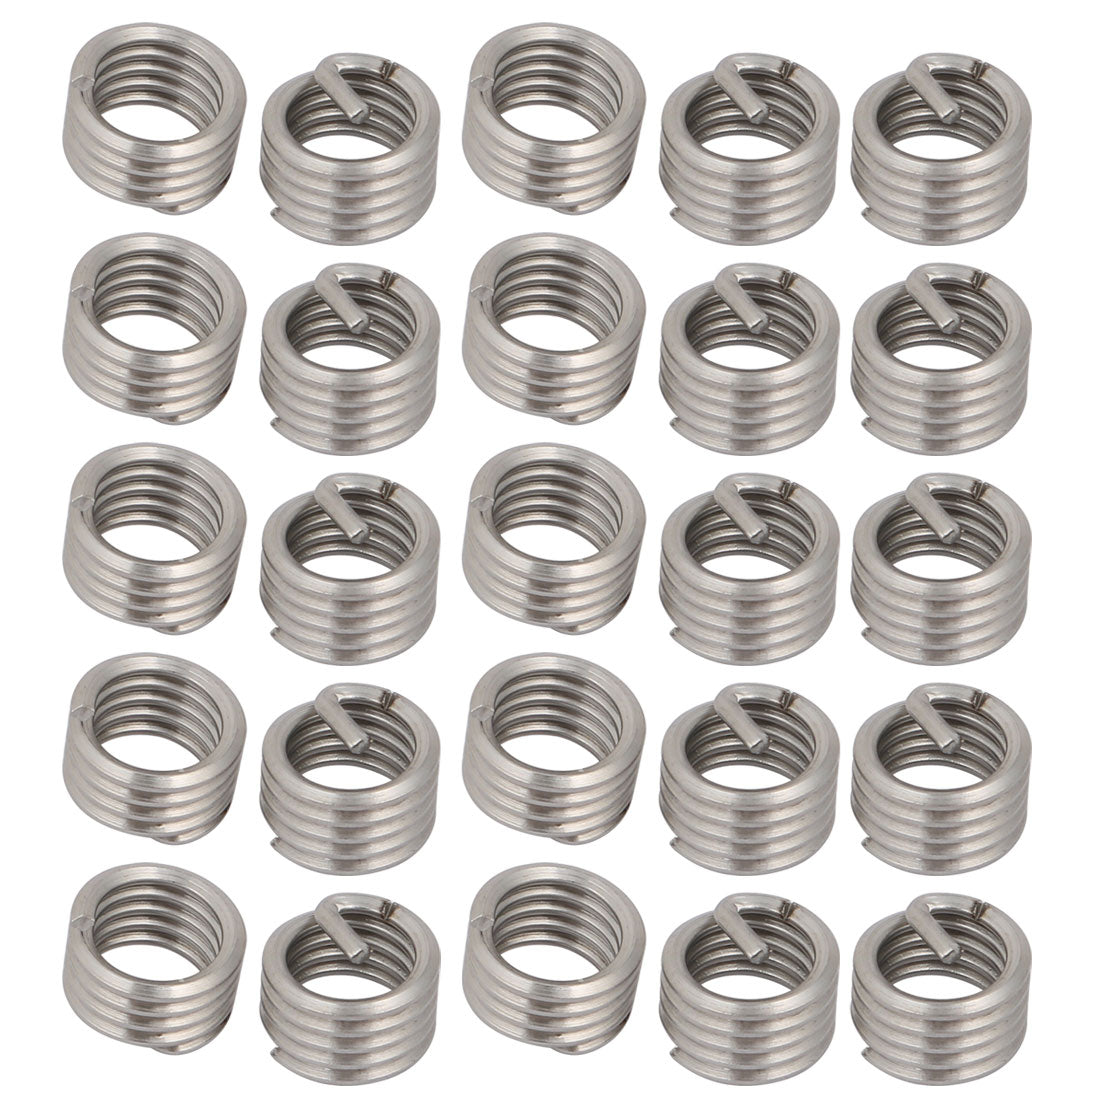 uxcell Uxcell 3/8"-16x0.375" 304 Stainless Steel Helical Coil Wire Thread Insert 25pcs